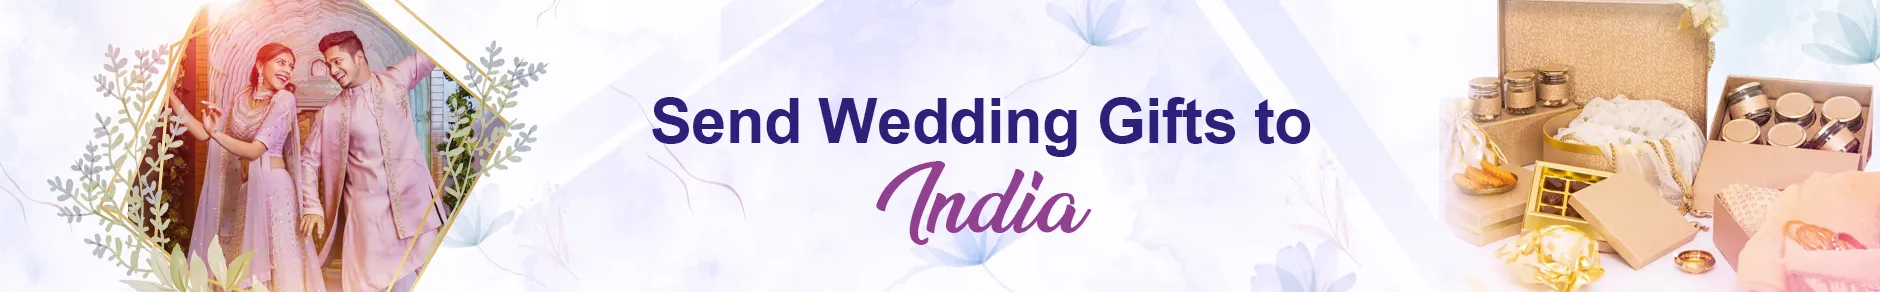 Wedding Gifts to India